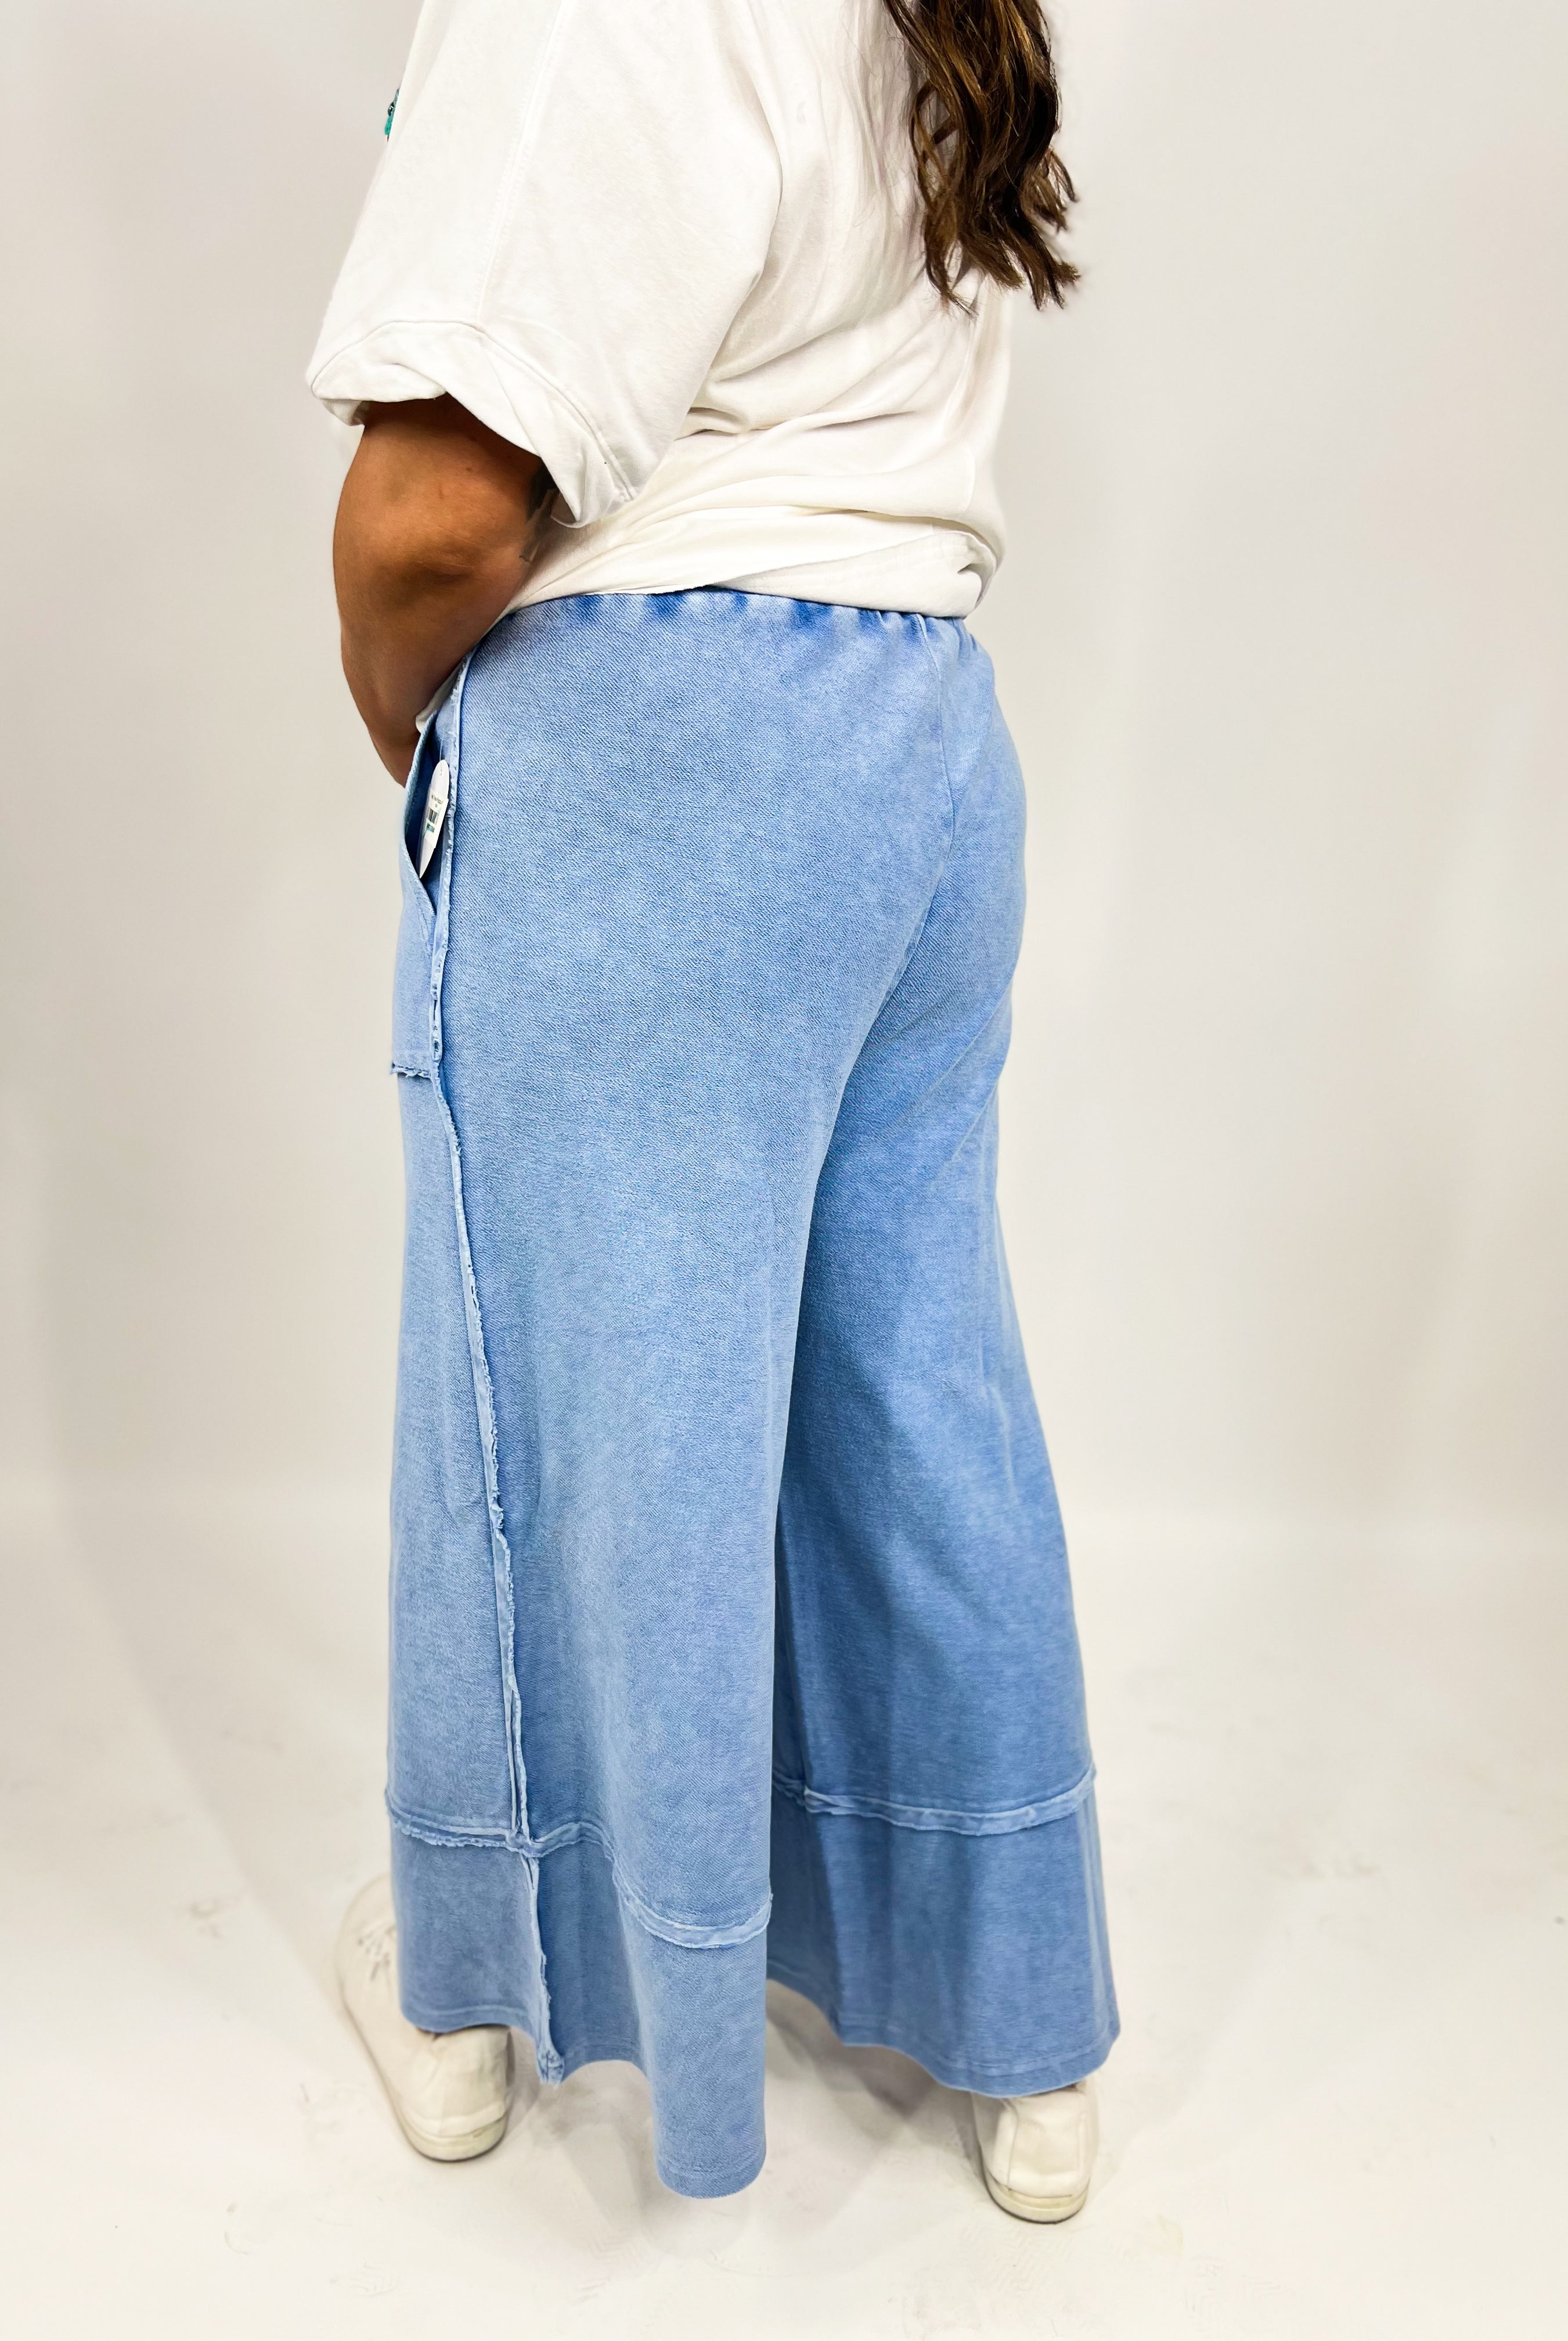 RESTOCK : Party Time Palazzo Pants-150 PANTS-Easel-Heathered Boho Boutique, Women's Fashion and Accessories in Palmetto, FL